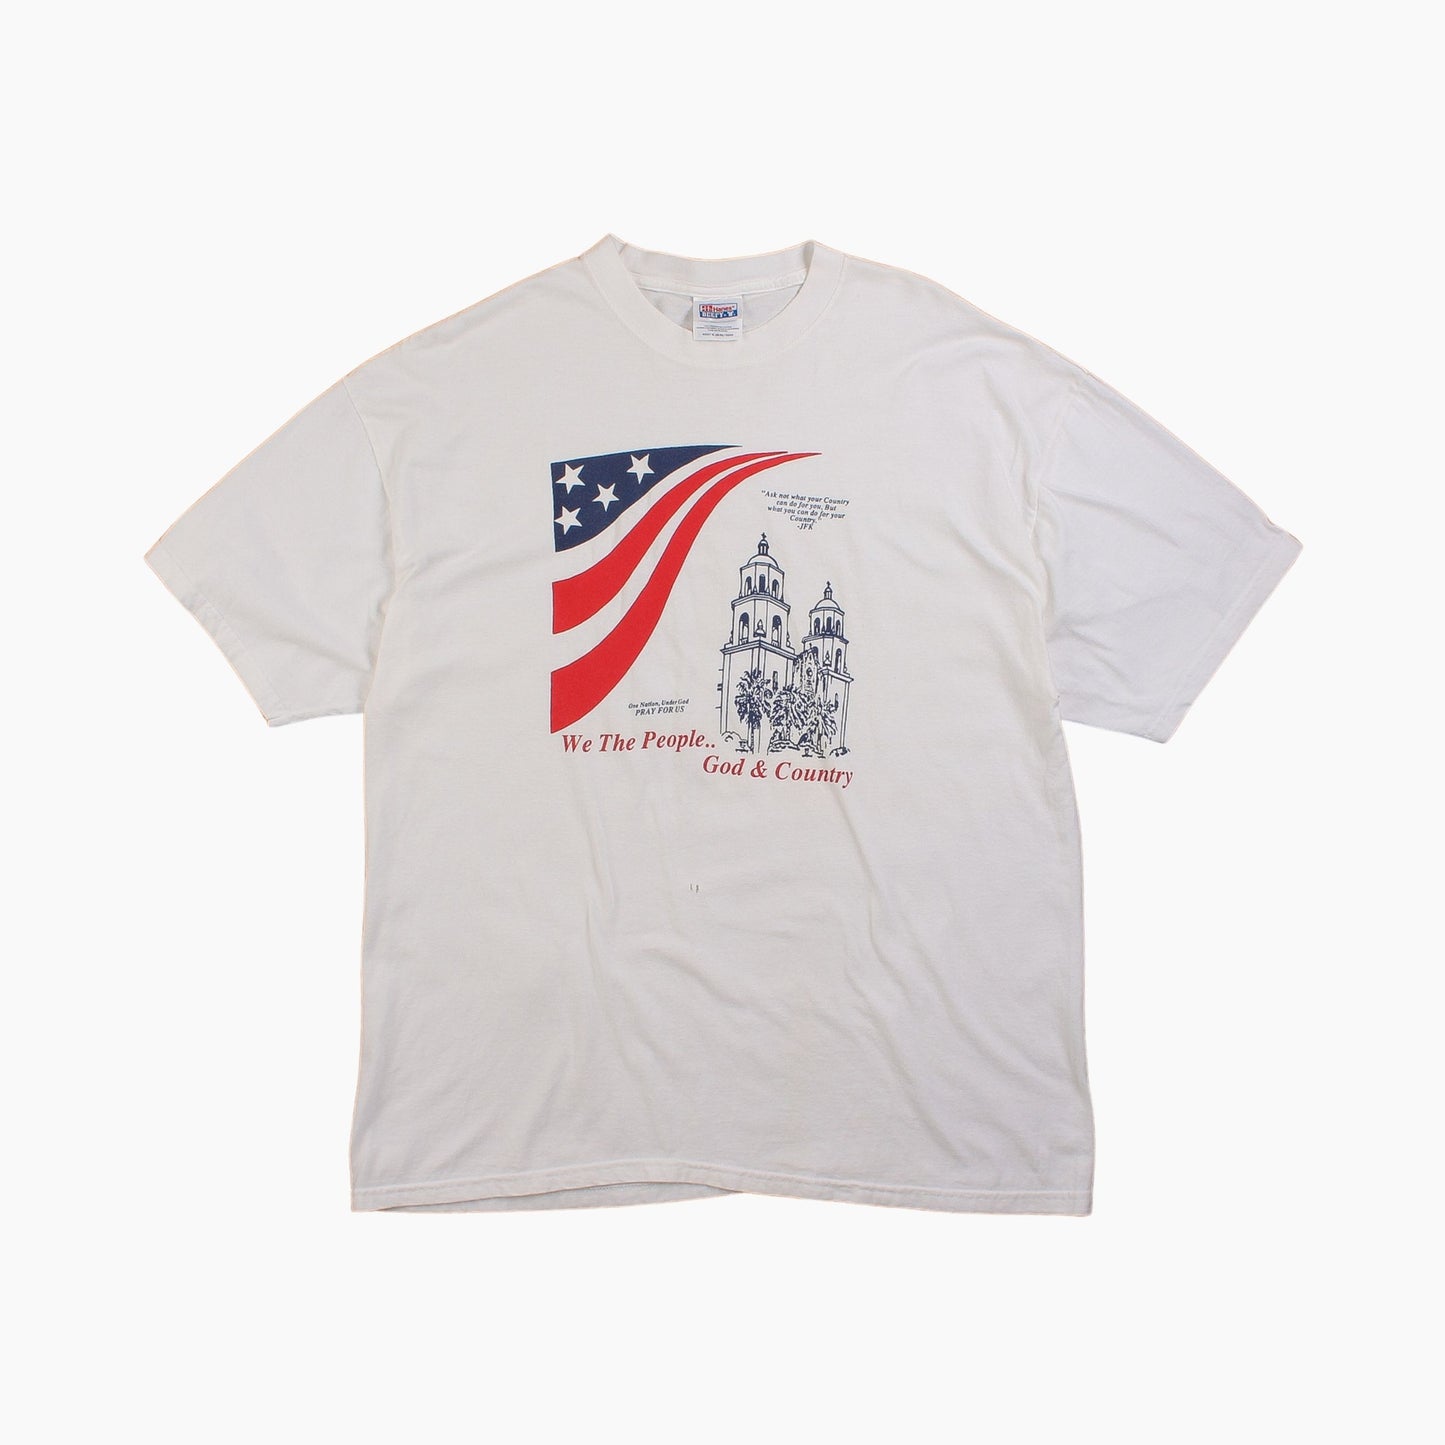 'We the People' T-Shirt - American Madness